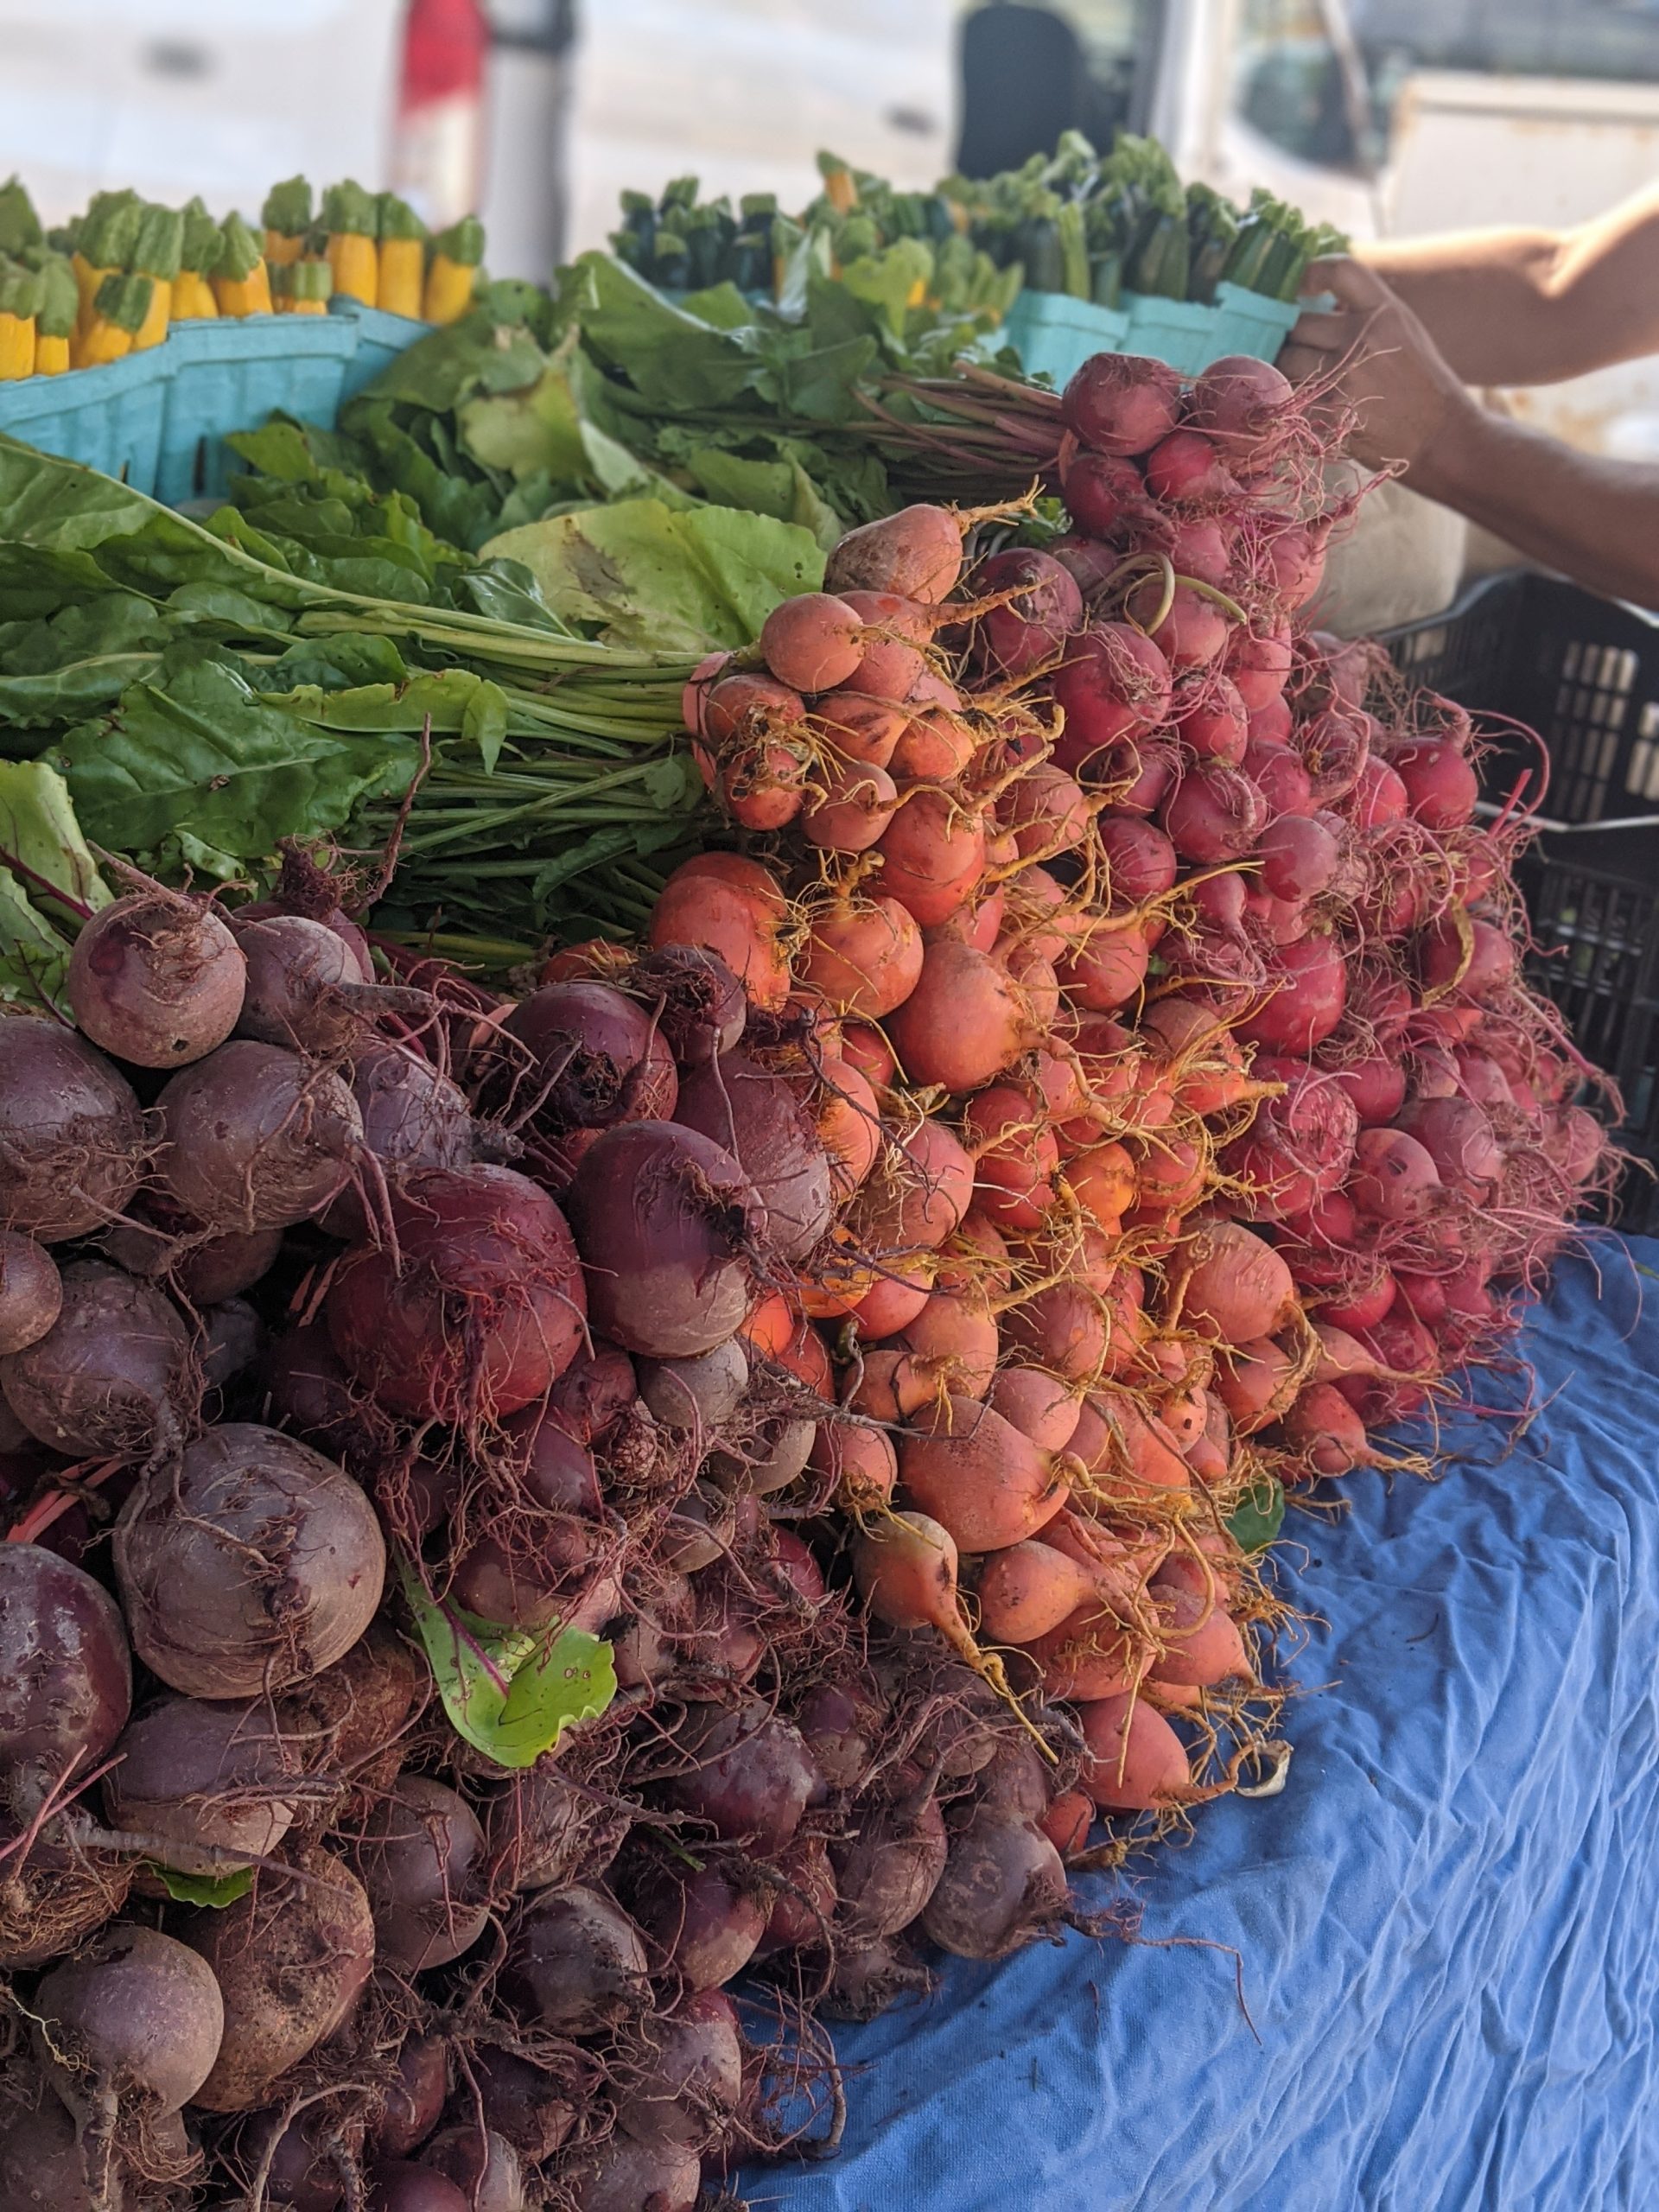 Purple, orange, and red beets neatly stacked up for sale at the farmers market.